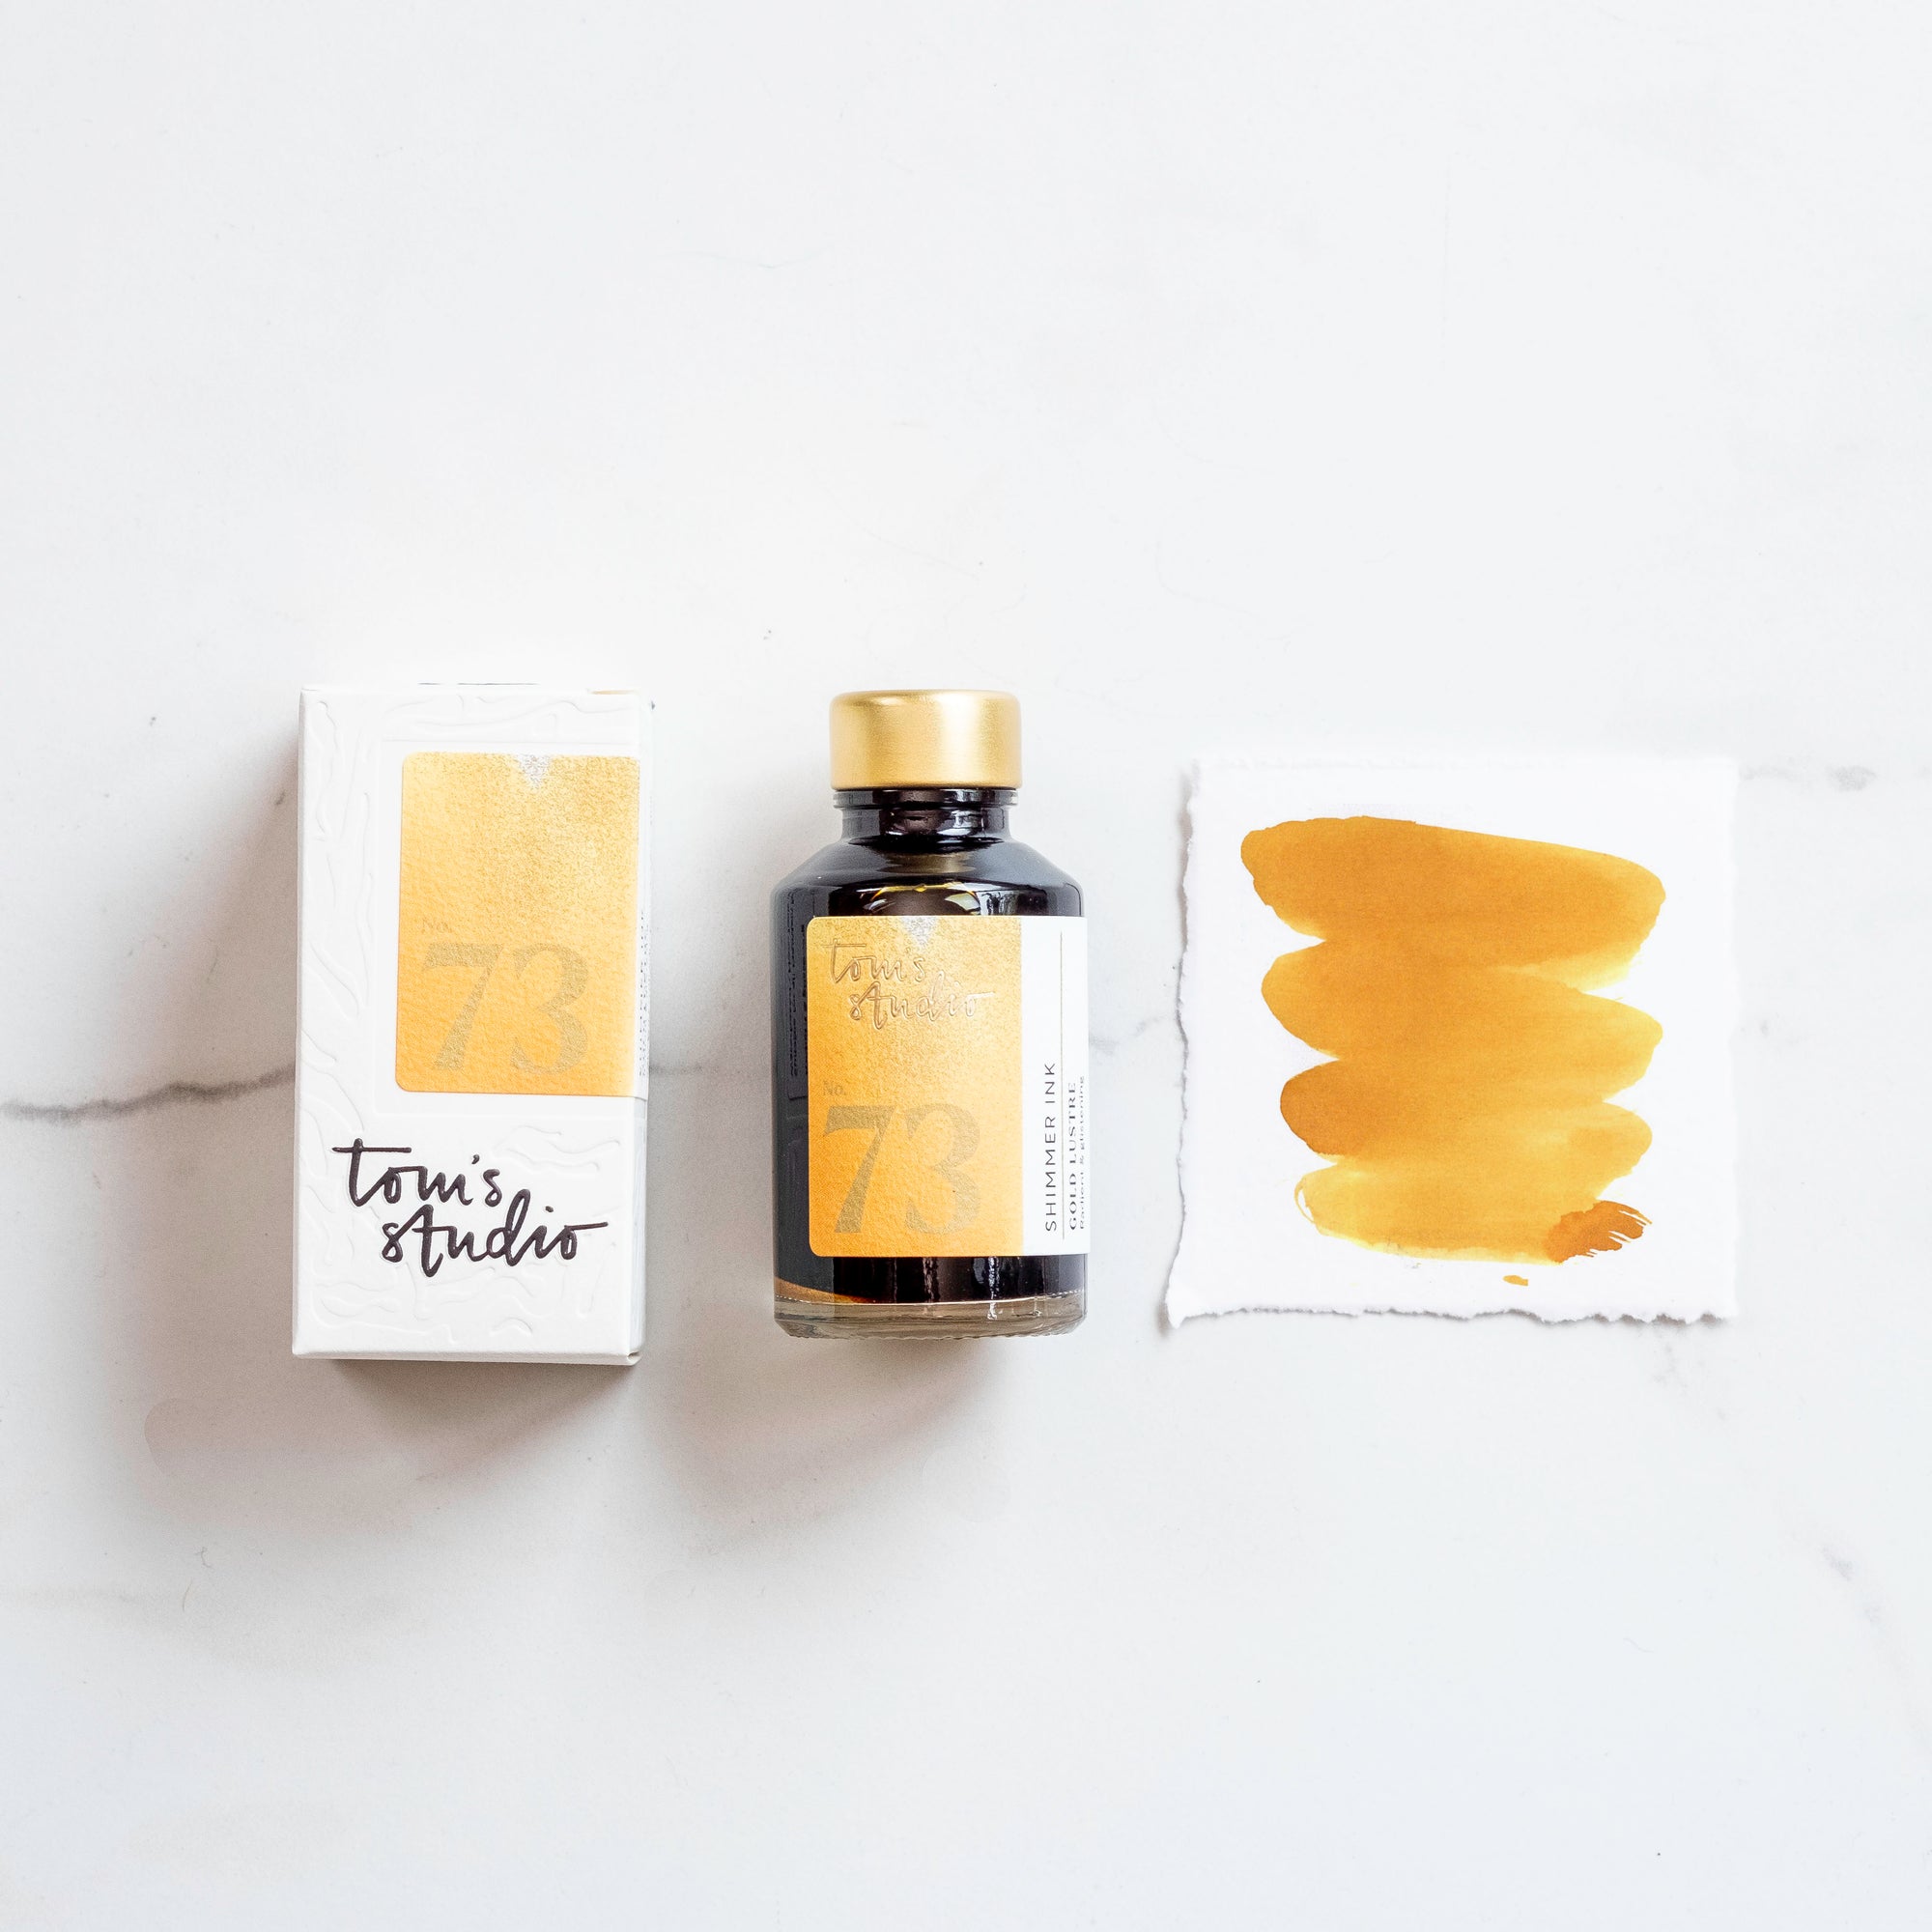 Tom's Studio Golden Lustre Shimmer Fountain Pen Ink with two pens with inky goodness on paper with an ink swatch demonstrating the colour